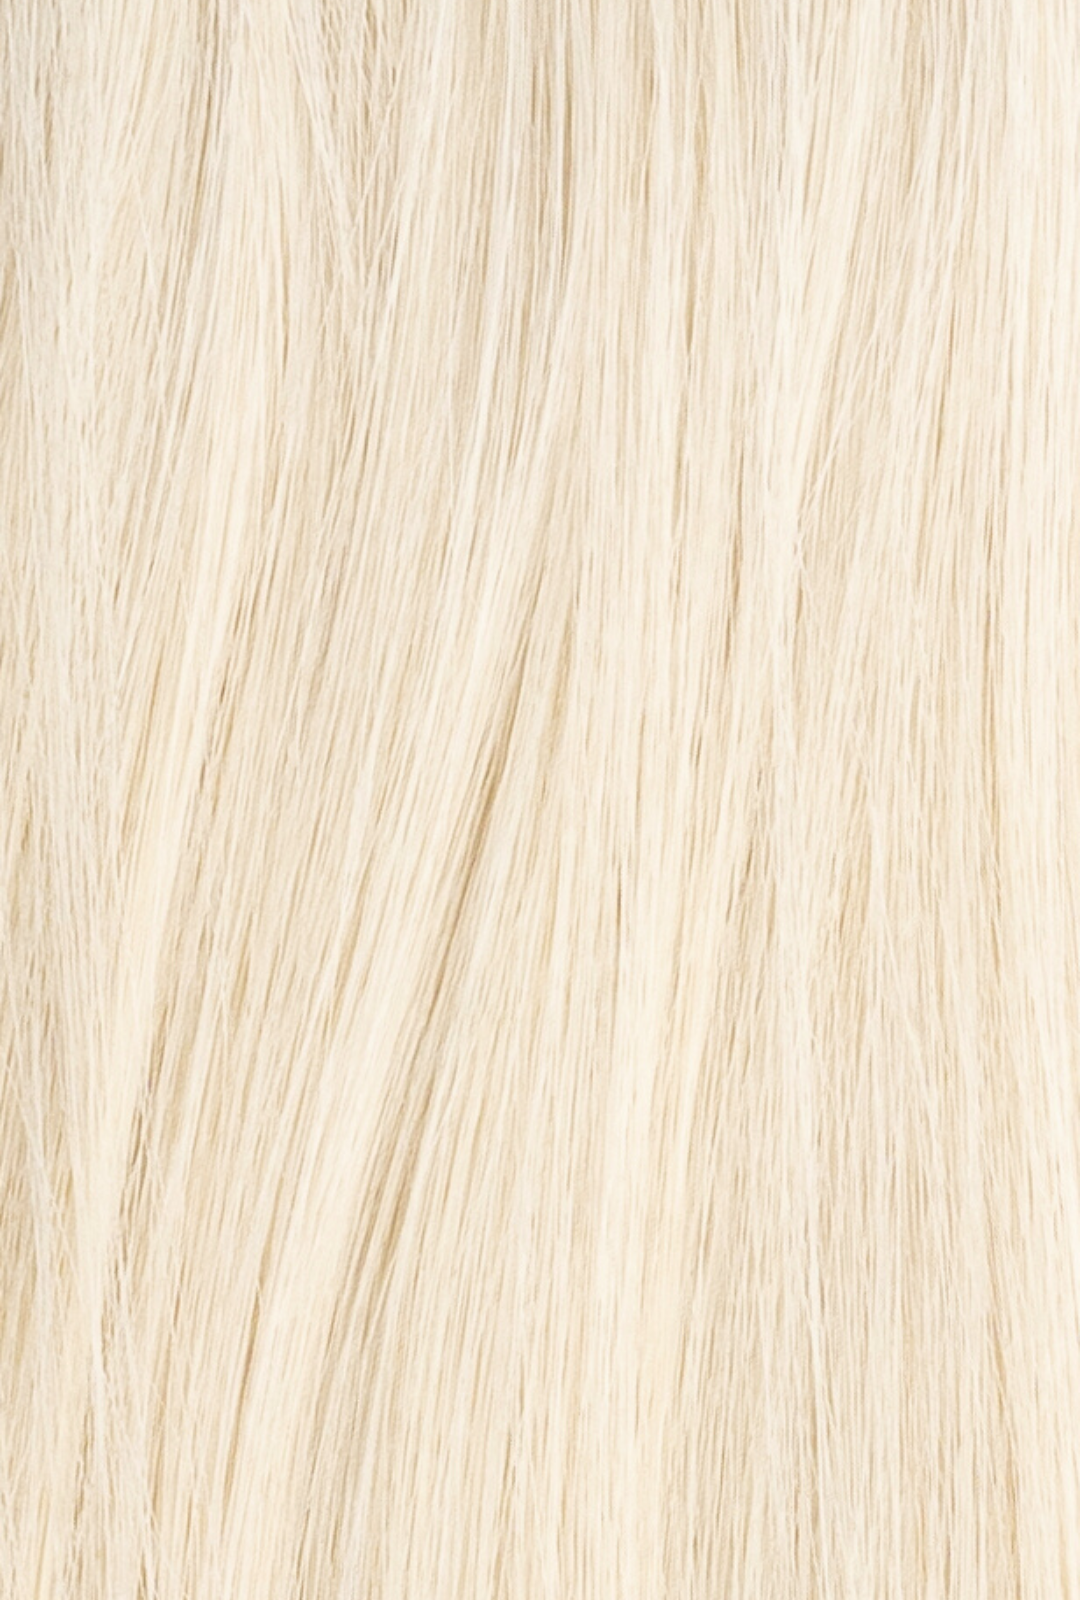 Laced Hair Machine Sewn Weft Extensions #60 (Platinum)